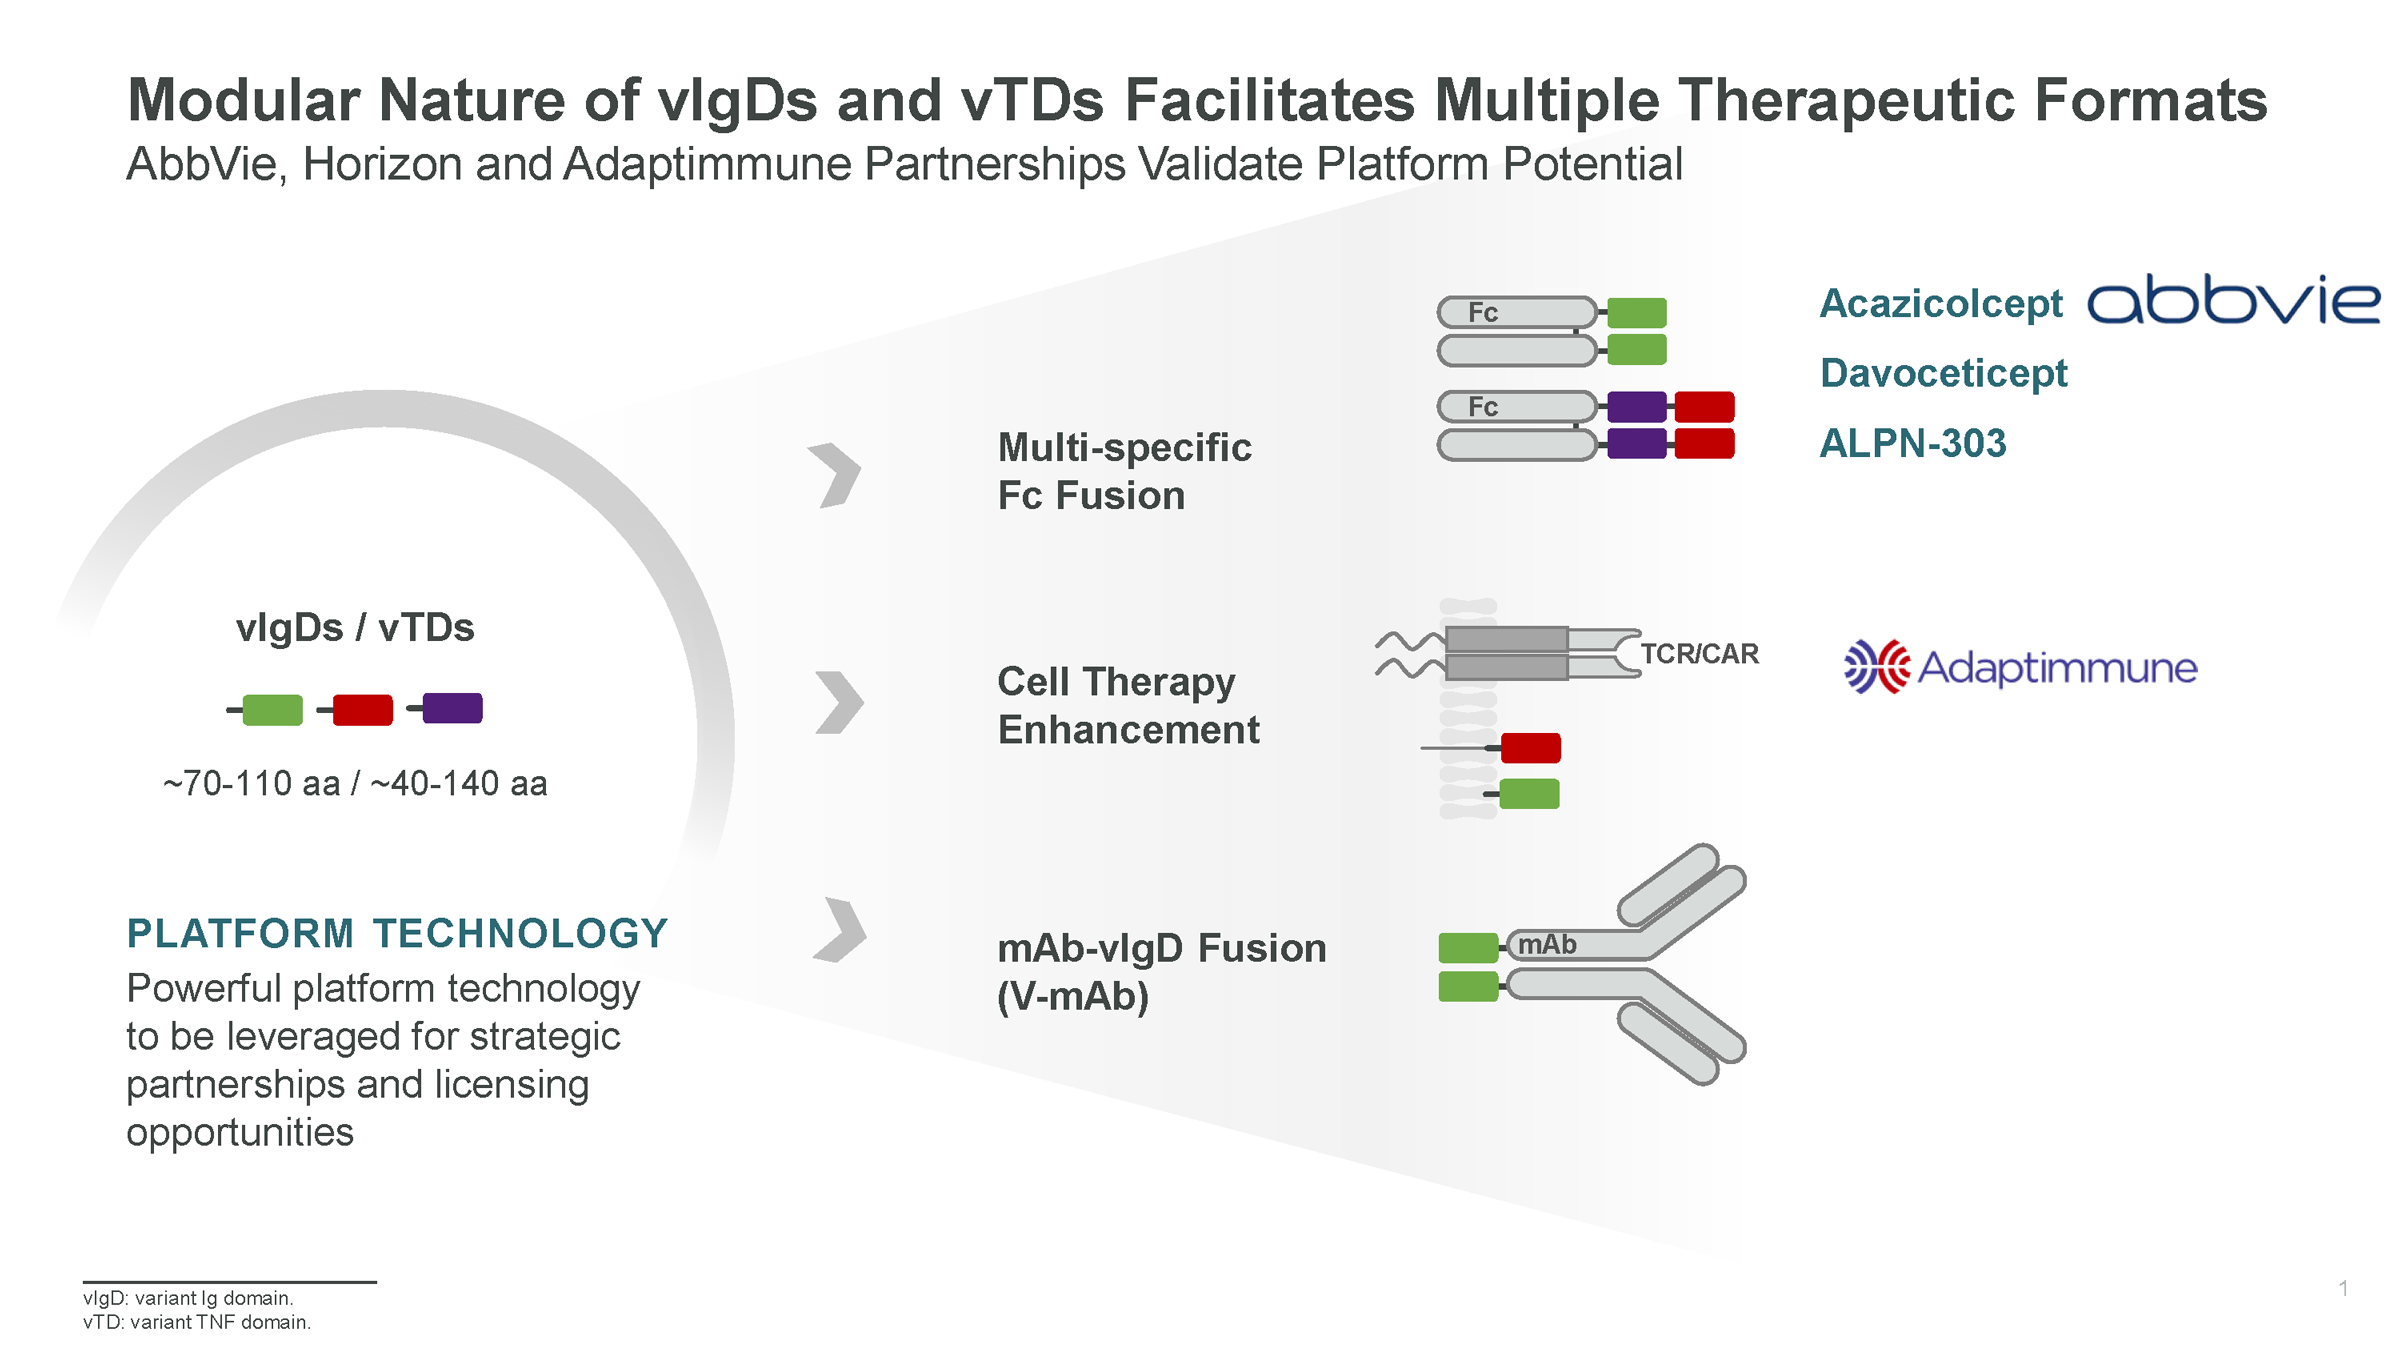 The modular nature of vlgDs and vTDs facilitates multiple therapeutic formats and forms the foundation of our partnerships with AbbVie, Horizon, and Adaptimmune